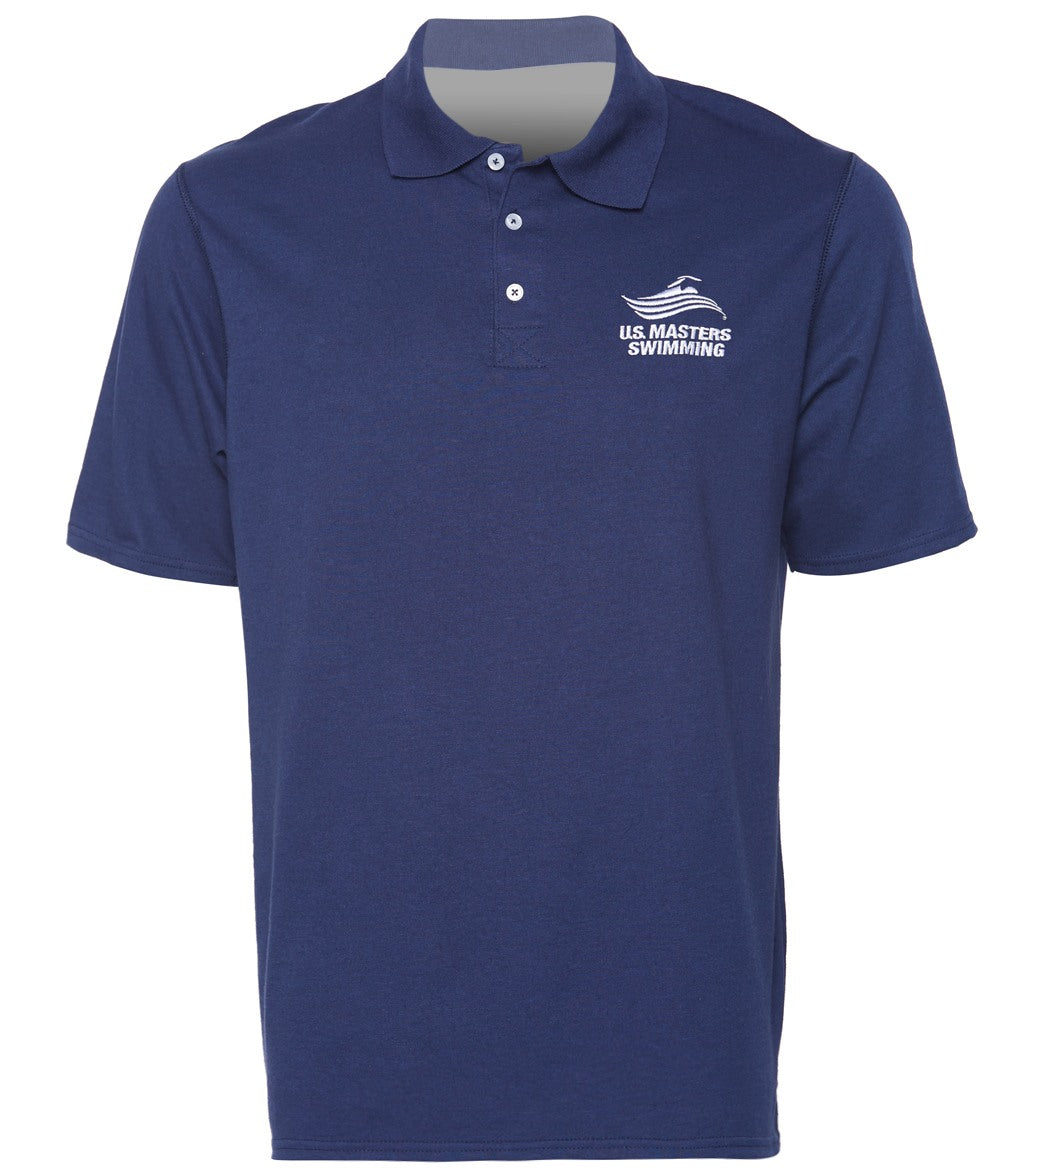 USMS Unisex Performance Polo at SwimOutlet.com